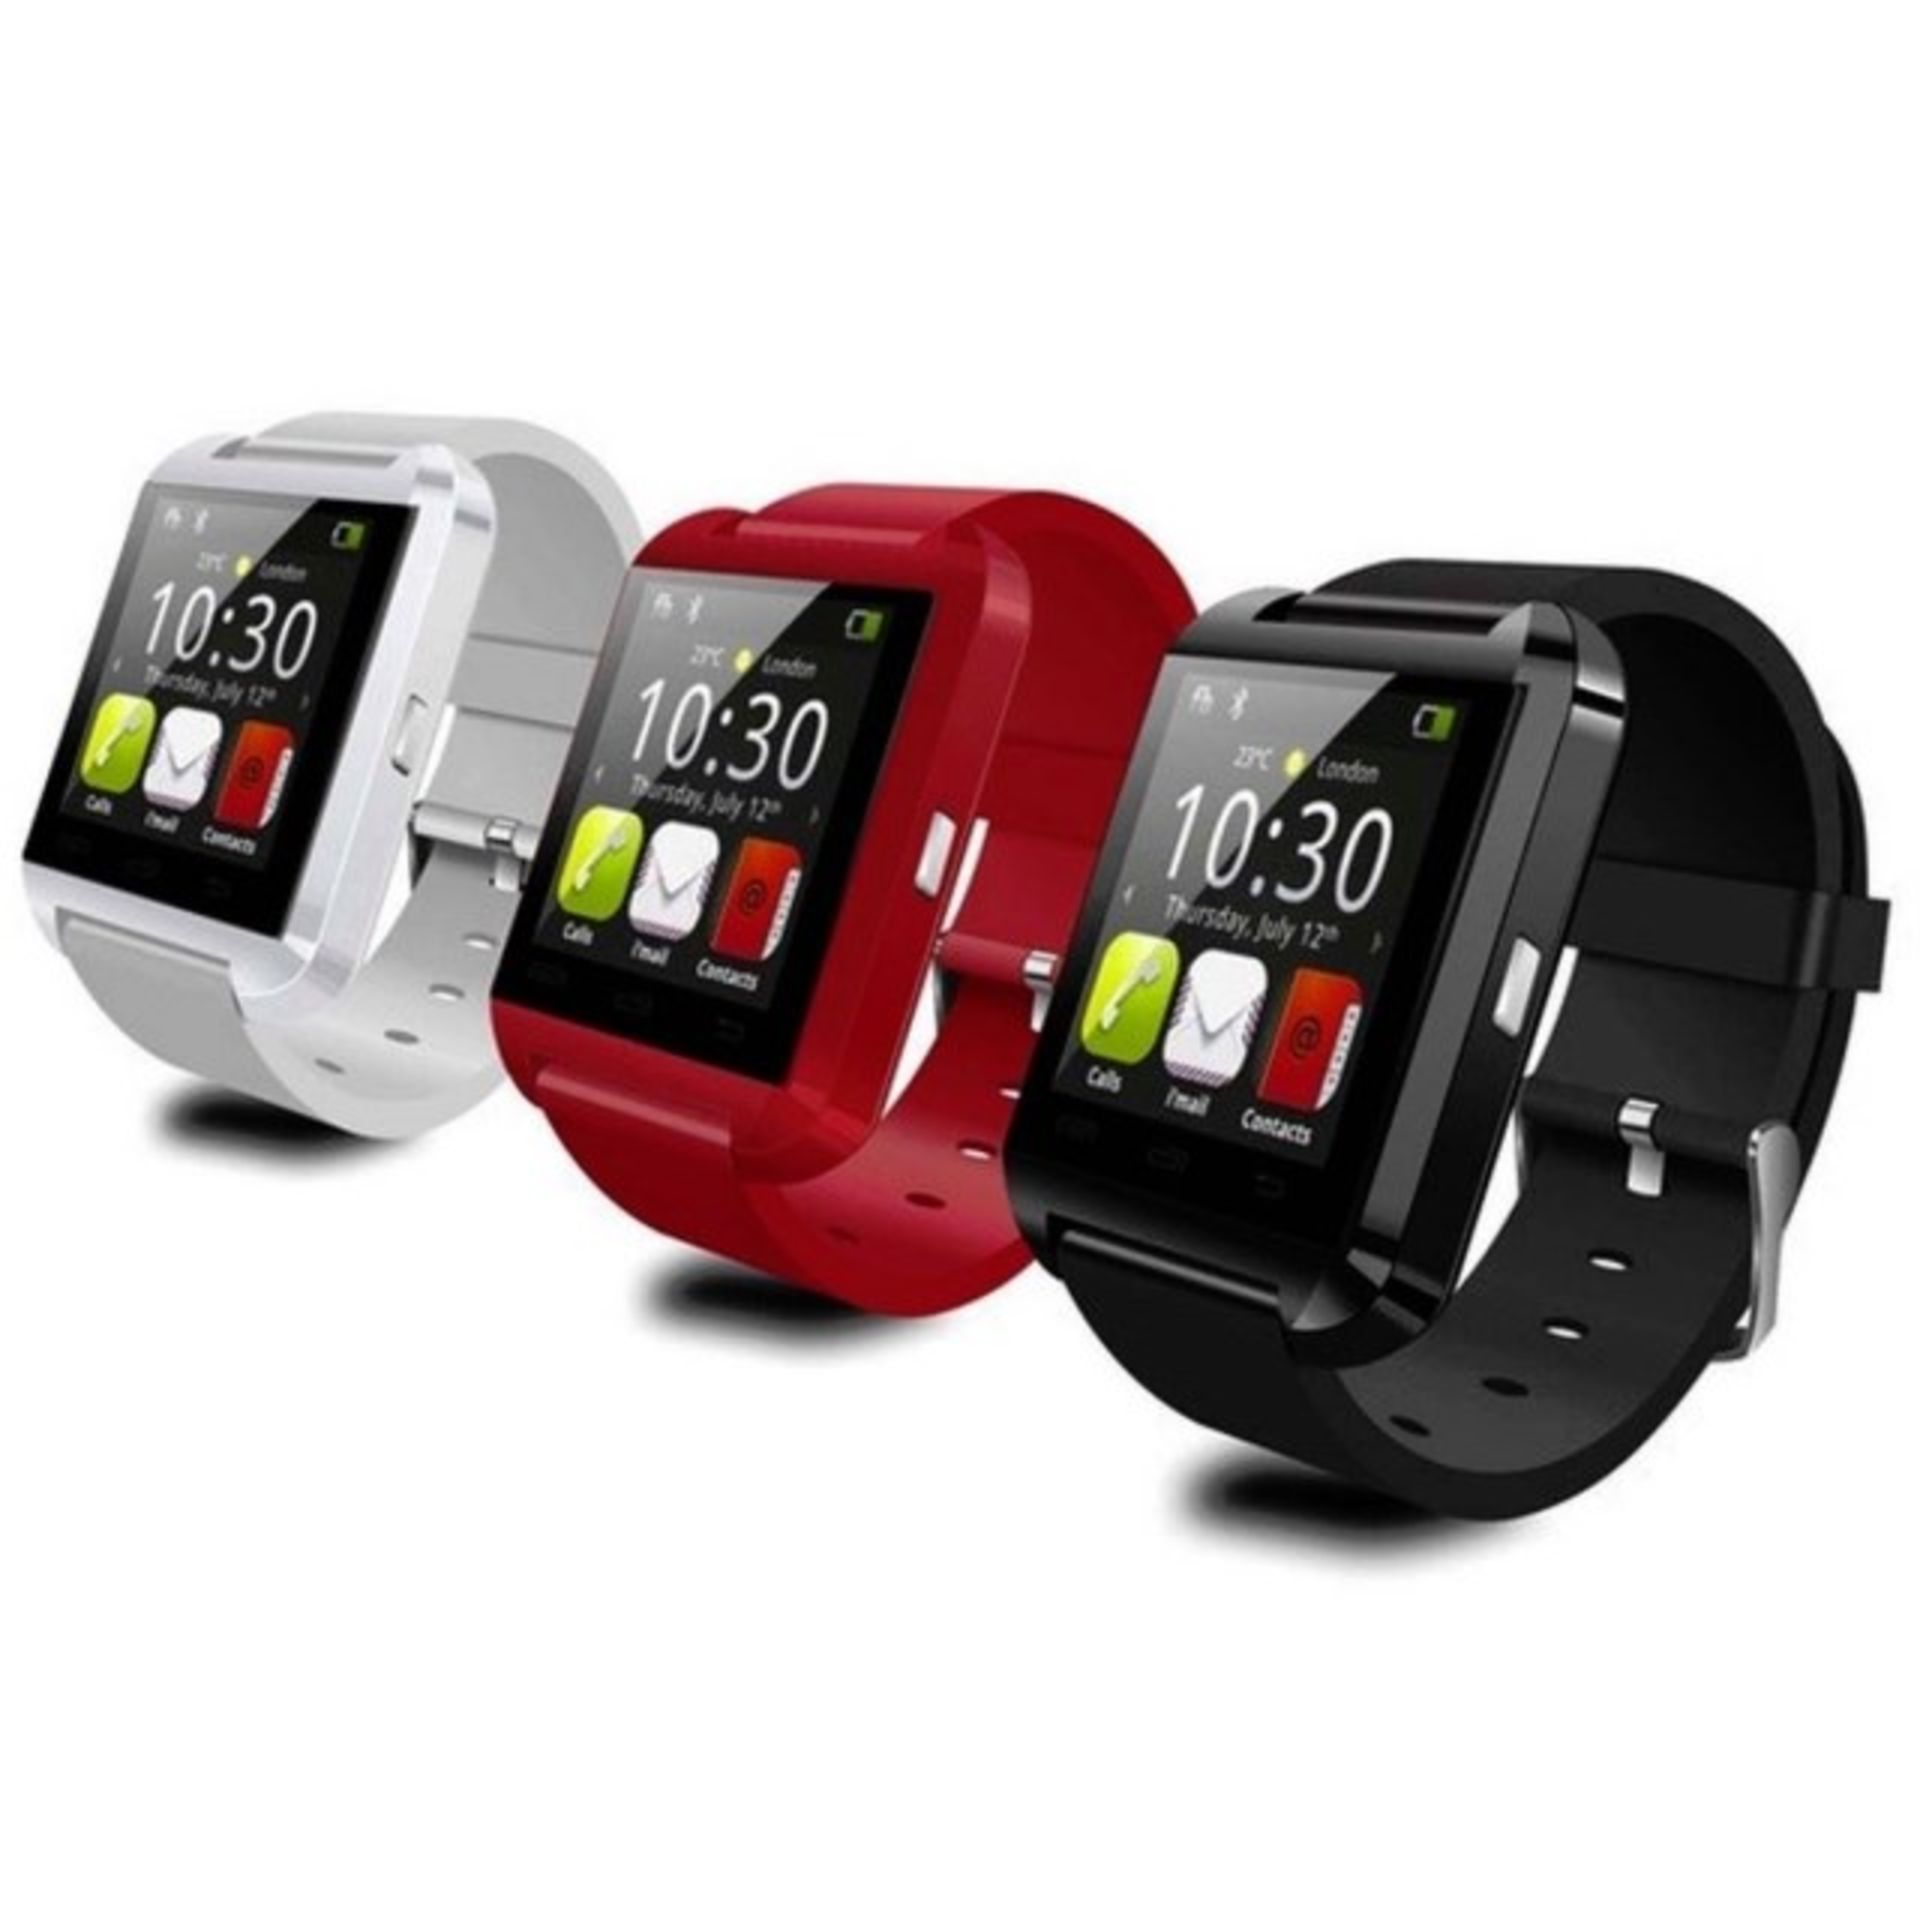 Brand New Boxed Bluetooth Smart Watch With Touchscreen - Can Talk/Recieve Phone Calls and Text